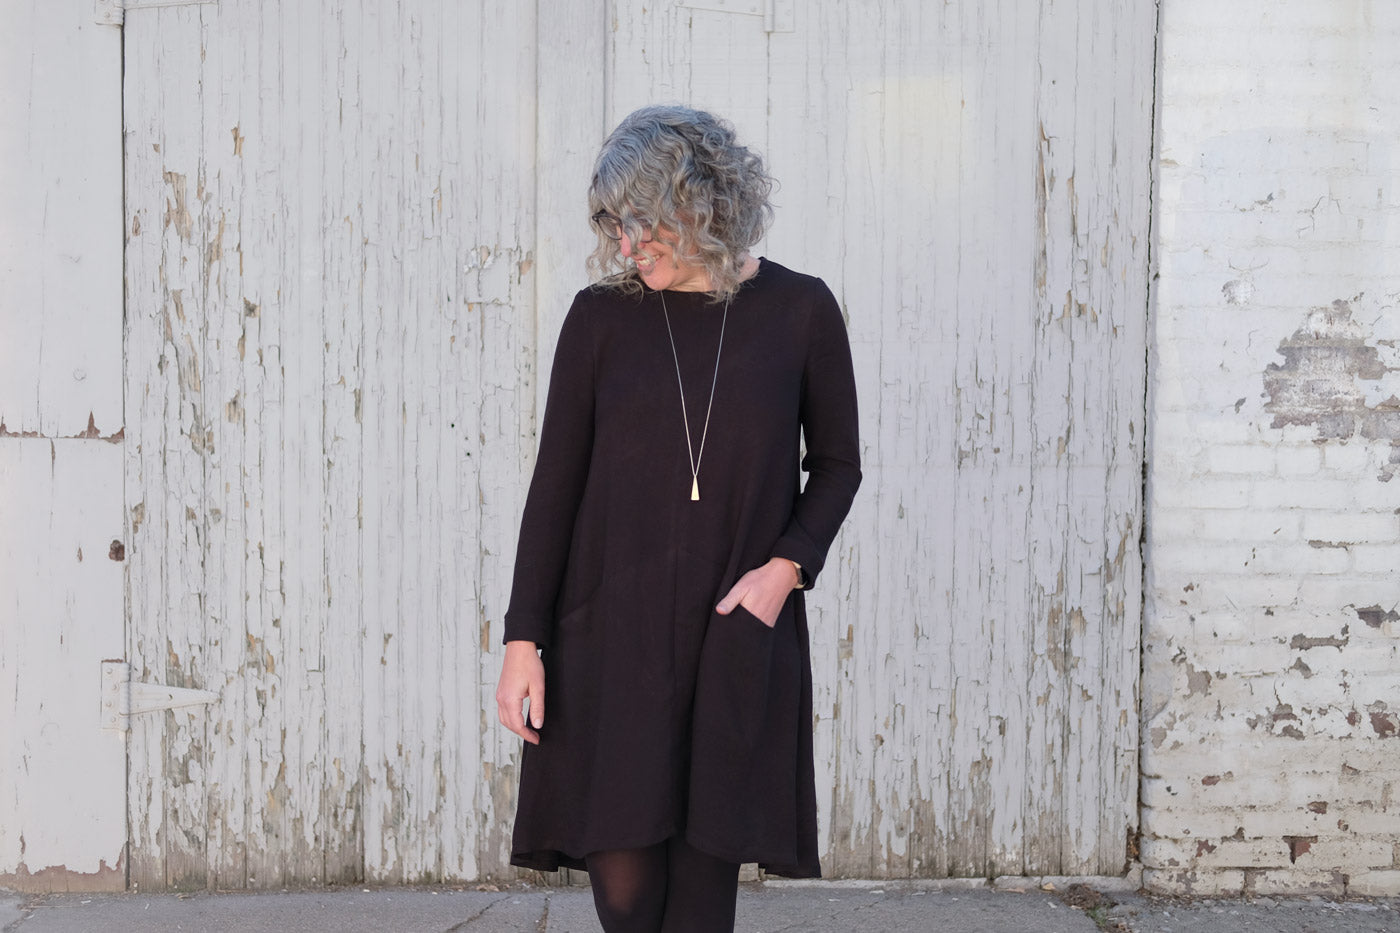 Jaime wearing her black Grainline Studio Farrow Dress and looking at the ground